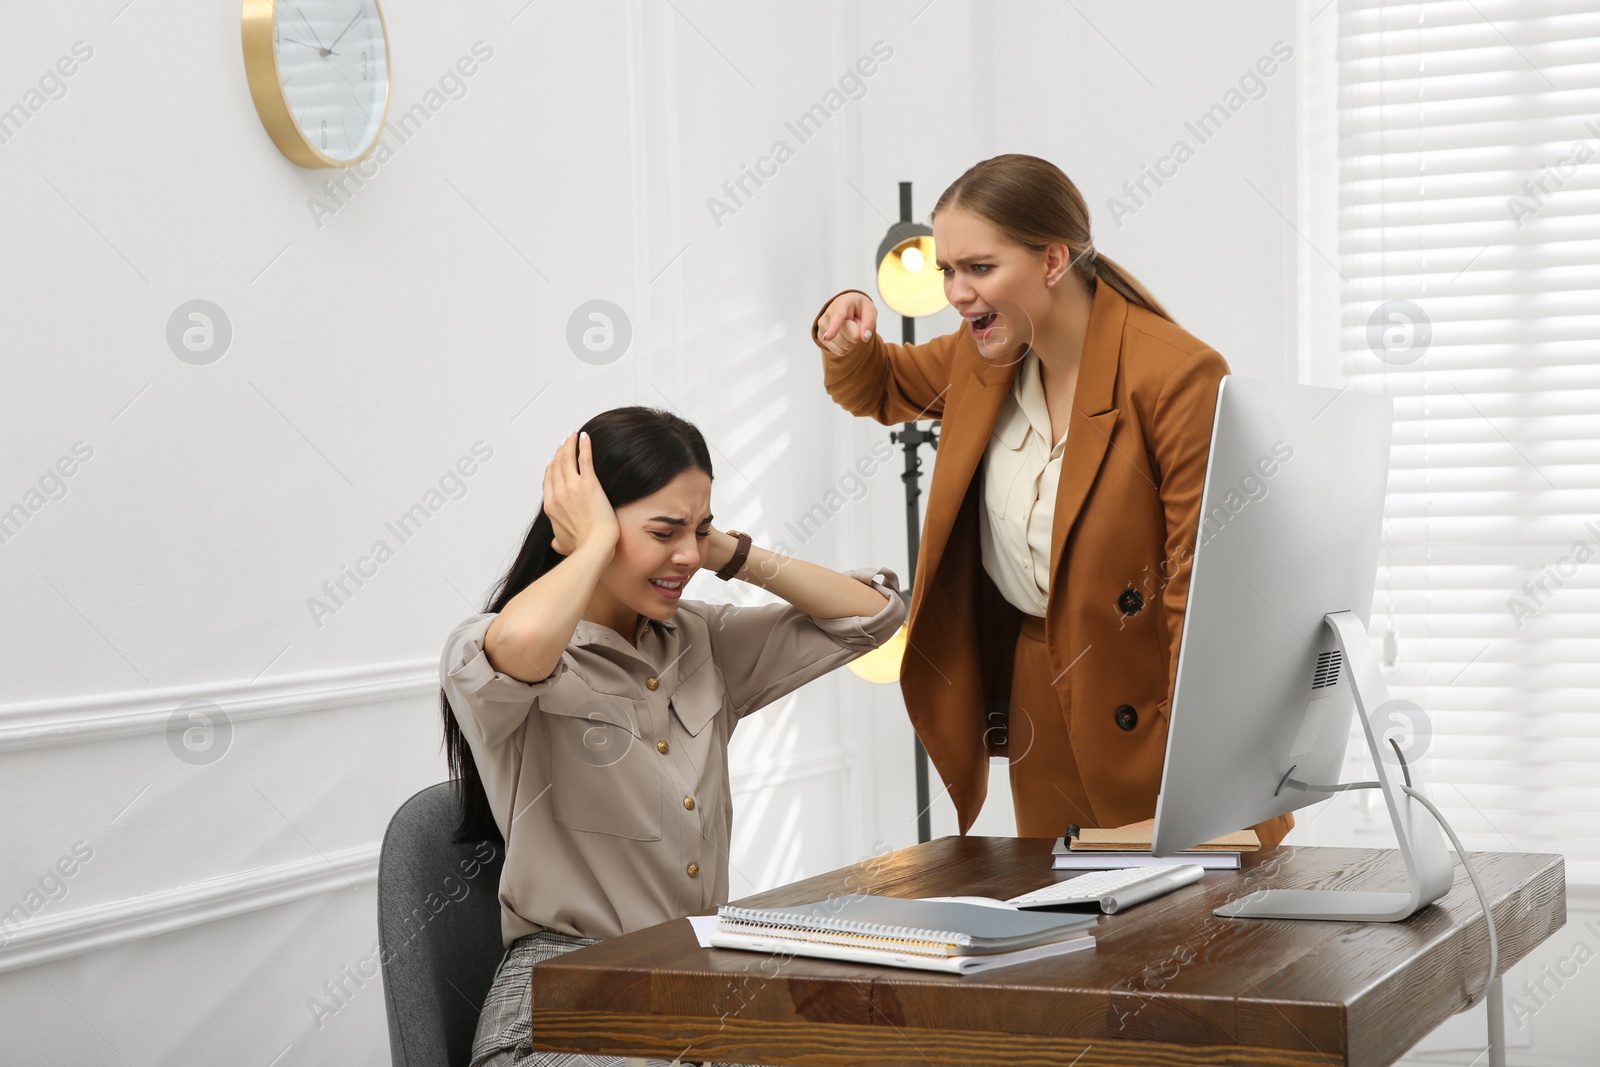 Photo of Boss screaming at employee in office. Toxic work environment